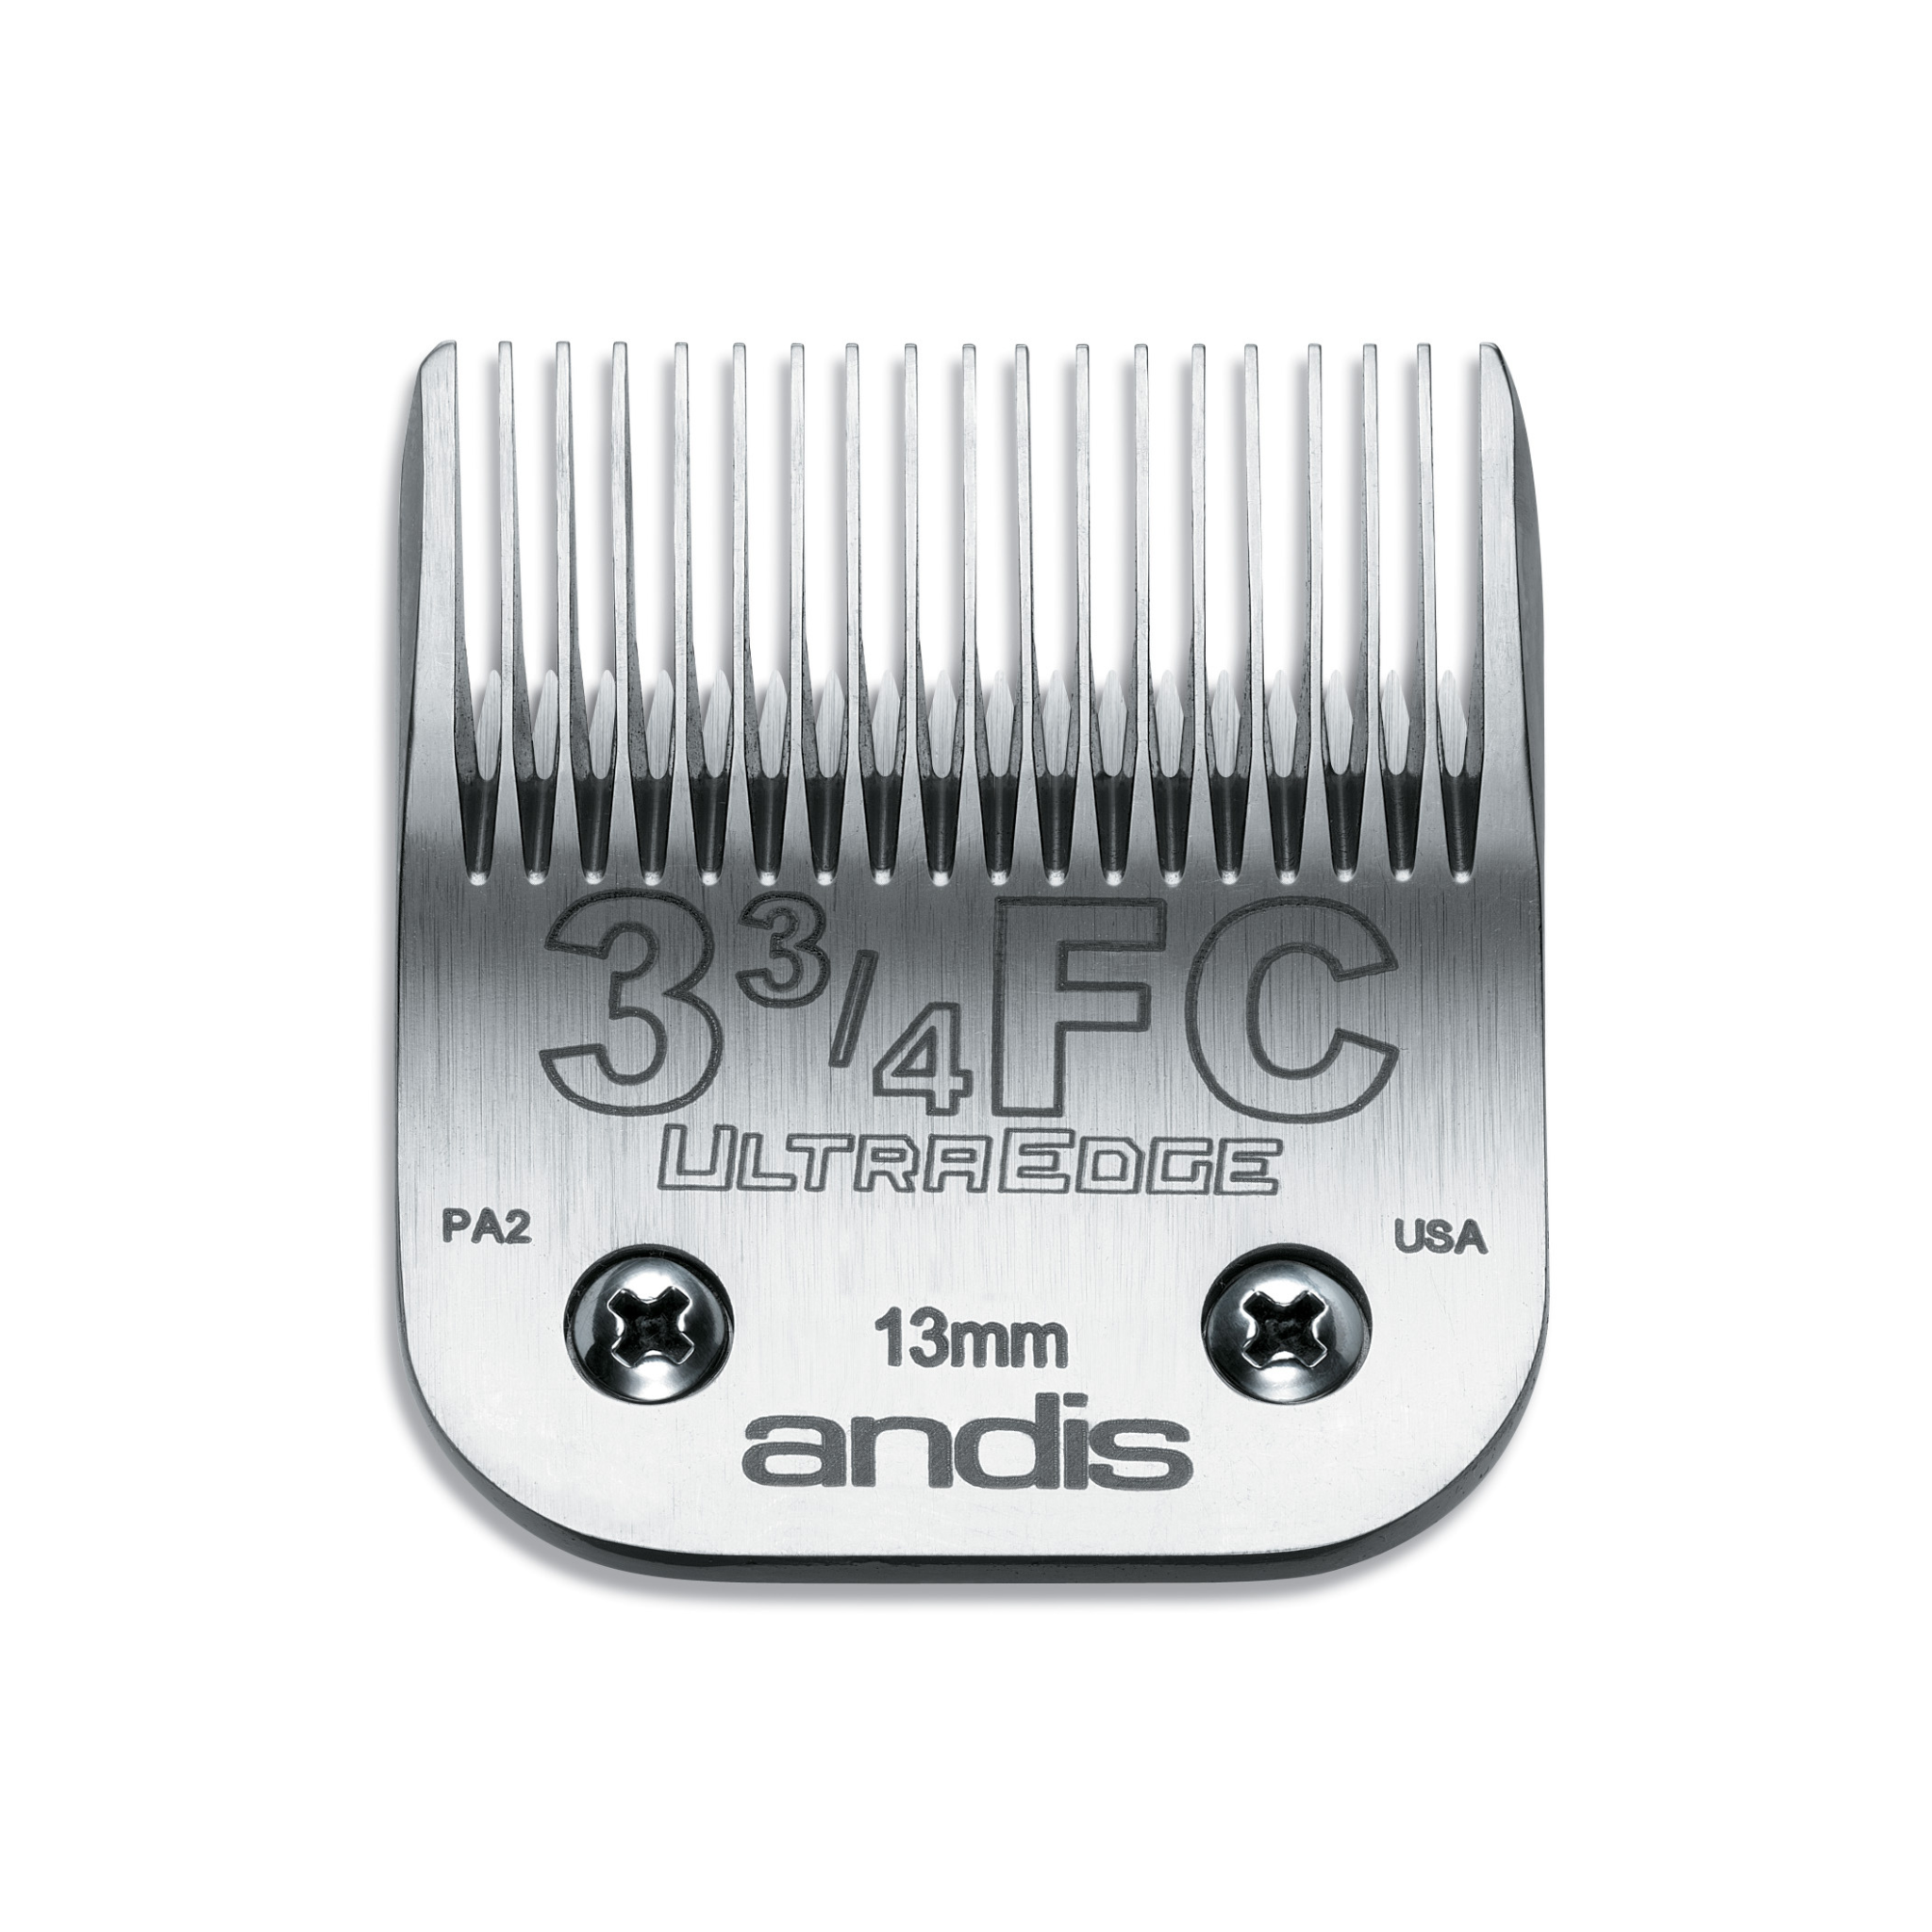 Andis Ultra Edge Blade, Size 3-3/4FC